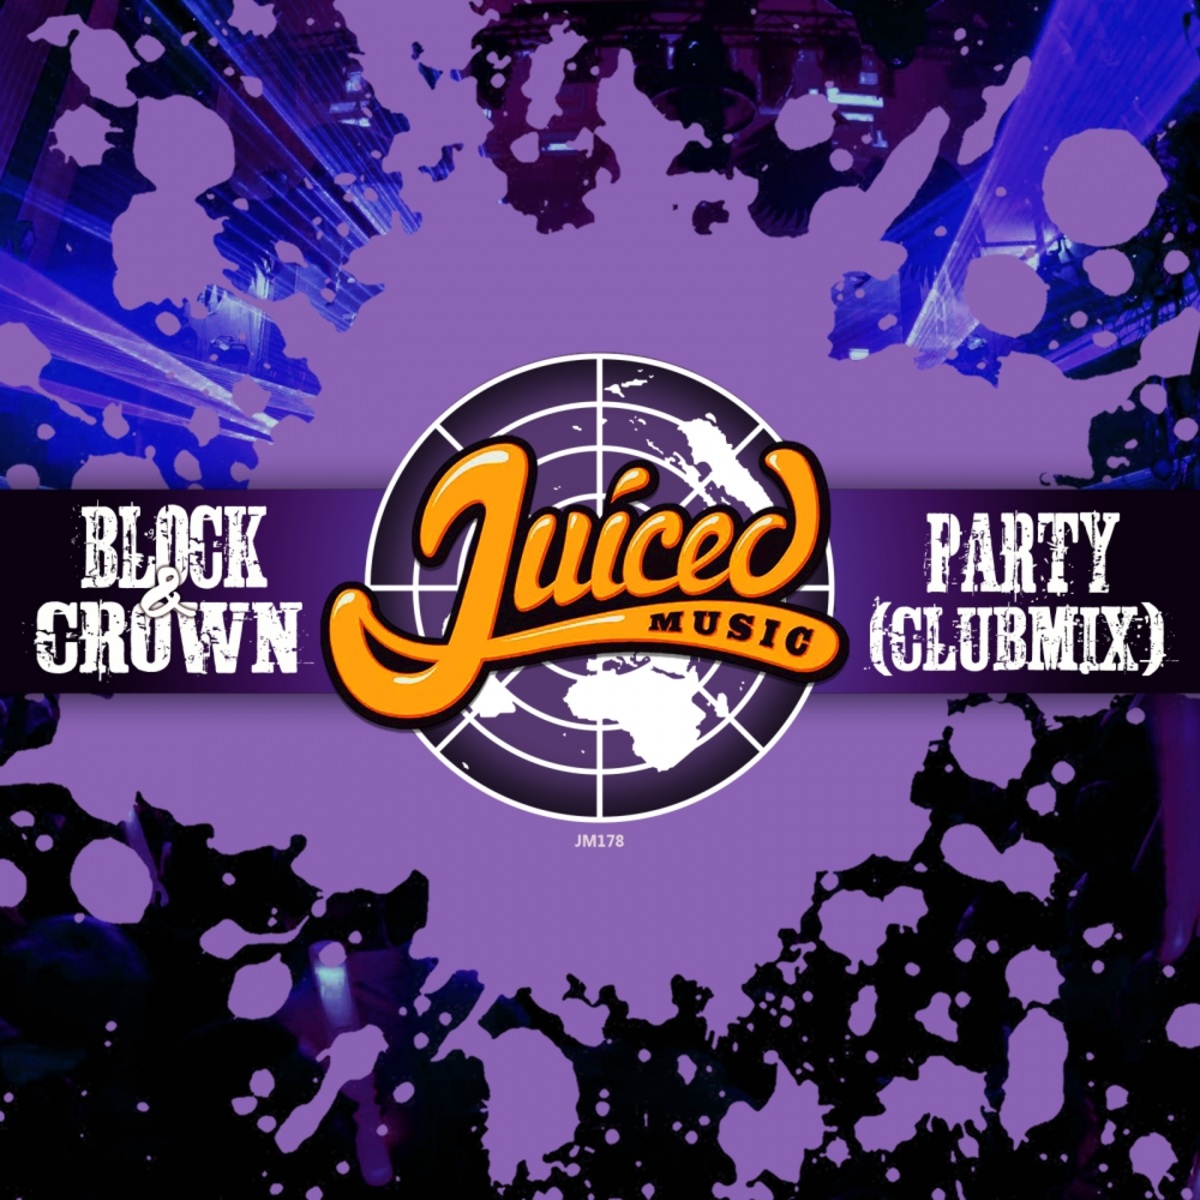 Block & Crown - Party (Clubmix) / Juiced Music